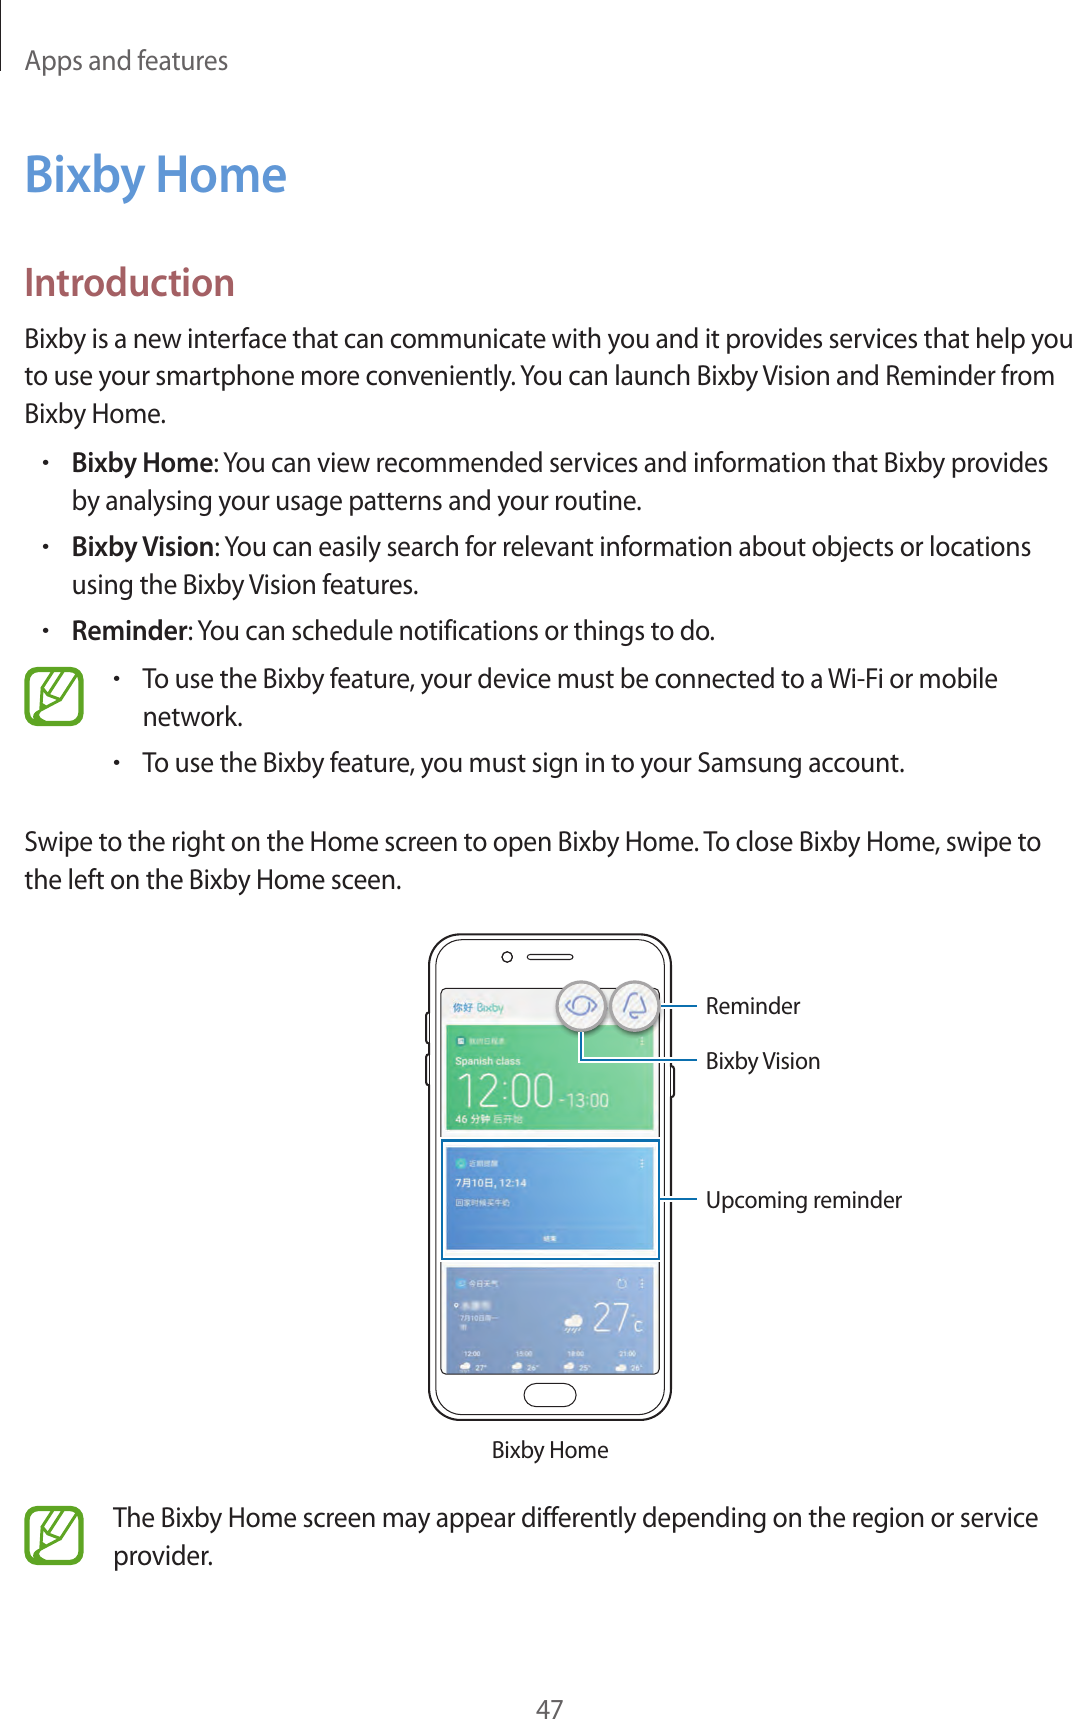 Apps and features47Bixby HomeIntroductionBixby is a new interface that can communicate with you and it provides services that help you to use your smartphone more conveniently. You can launch Bixby Vision and Reminder from Bixby Home.•Bixby Home: You can view recommended services and information that Bixby provides by analysing your usage patterns and your routine.•Bixby Vision: You can easily search for relevant information about objects or locations using the Bixby Vision features.•Reminder: You can schedule notifications or things to do.•To use the Bixby feature, your device must be connected to a Wi-Fi or mobile network.•To use the Bixby feature, you must sign in to your Samsung account.Swipe to the right on the Home screen to open Bixby Home. To close Bixby Home, swipe to the left on the Bixby Home sceen.Bixby HomeUpcoming reminderReminderBixby VisionThe Bixby Home screen may appear differently depending on the region or service provider.